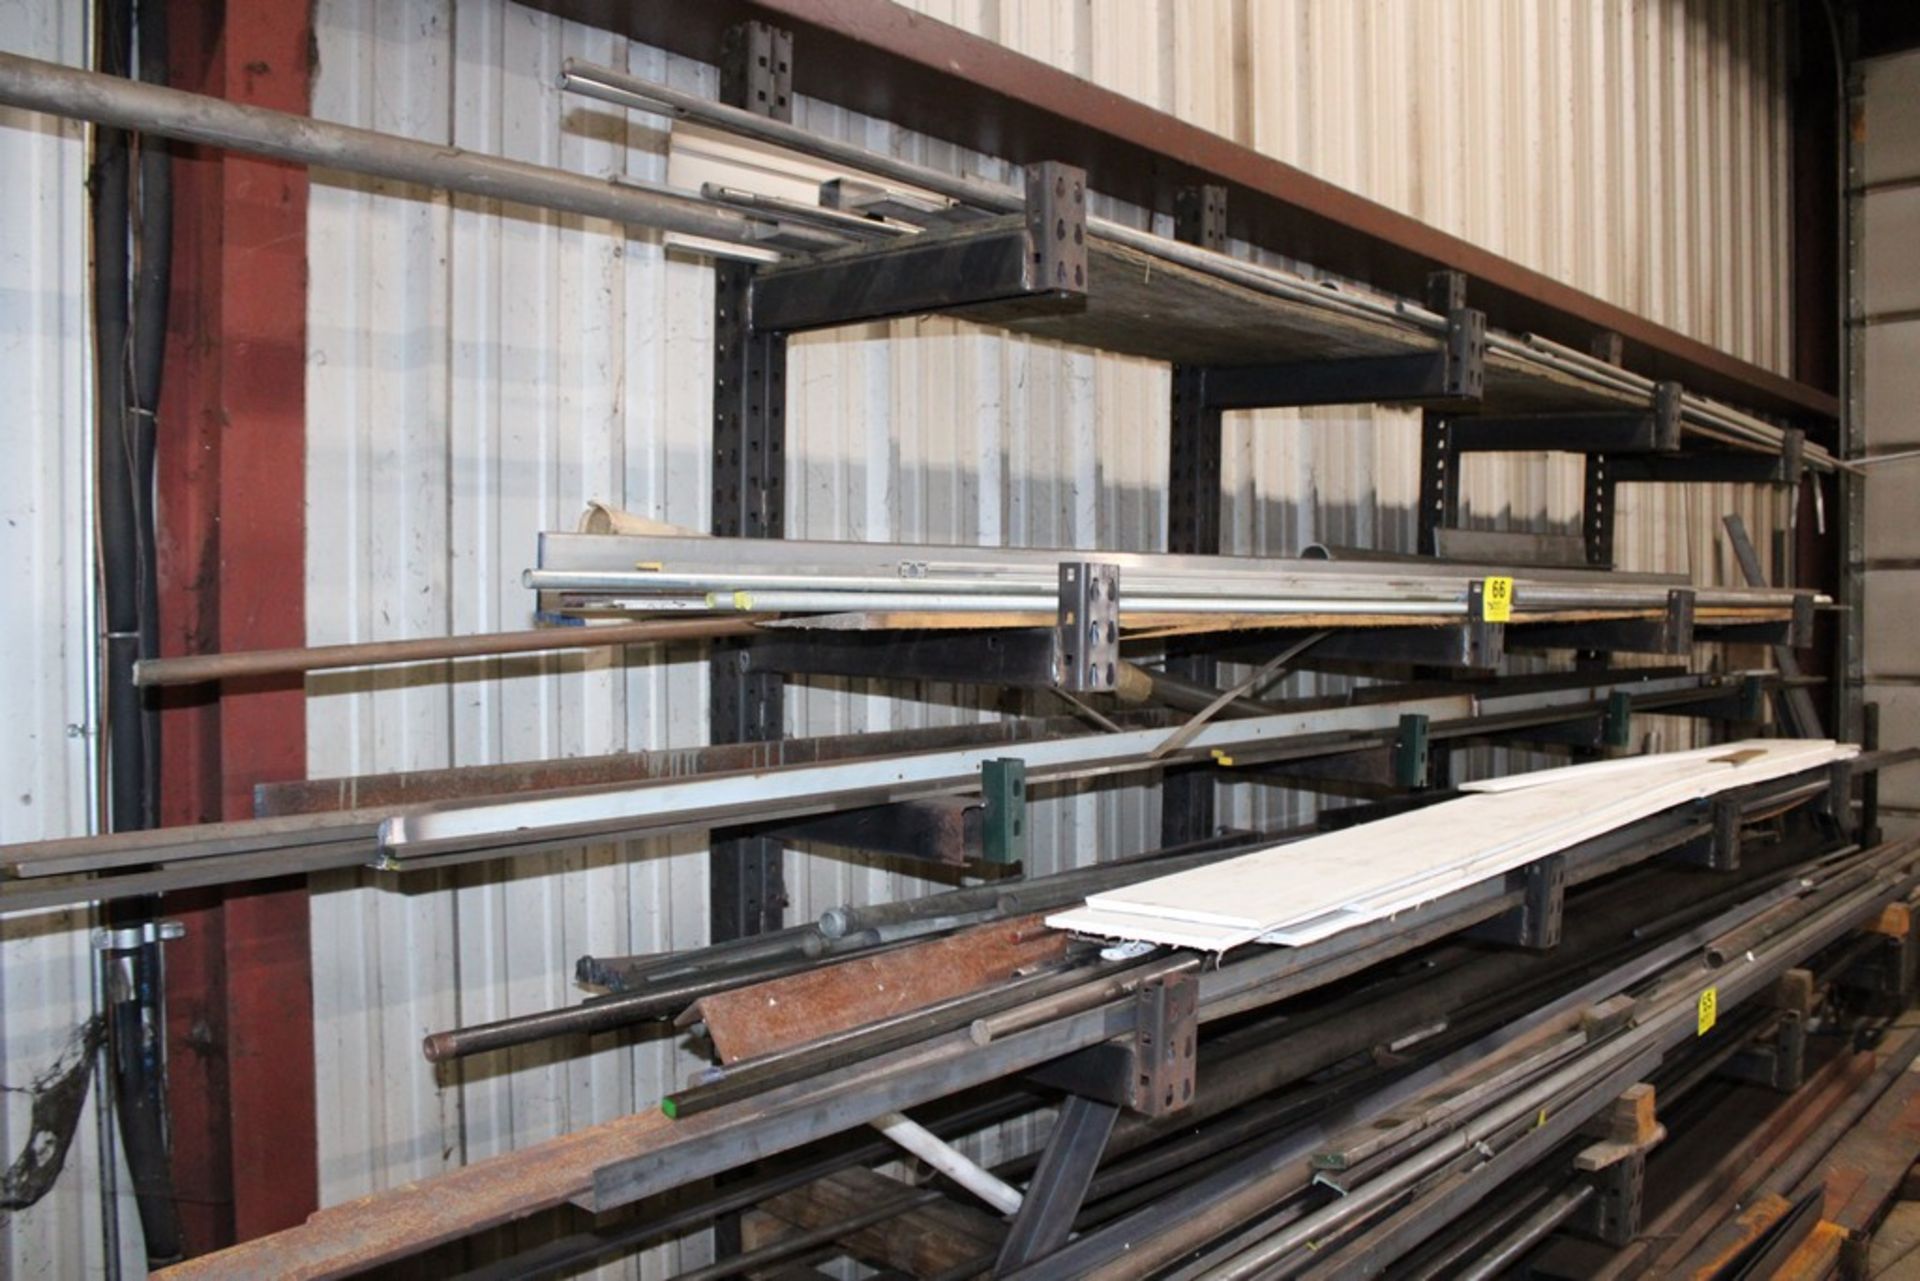 LARGE QTY OF ALUMINUM & STEEL STOCK ON RACK - Image 7 of 7